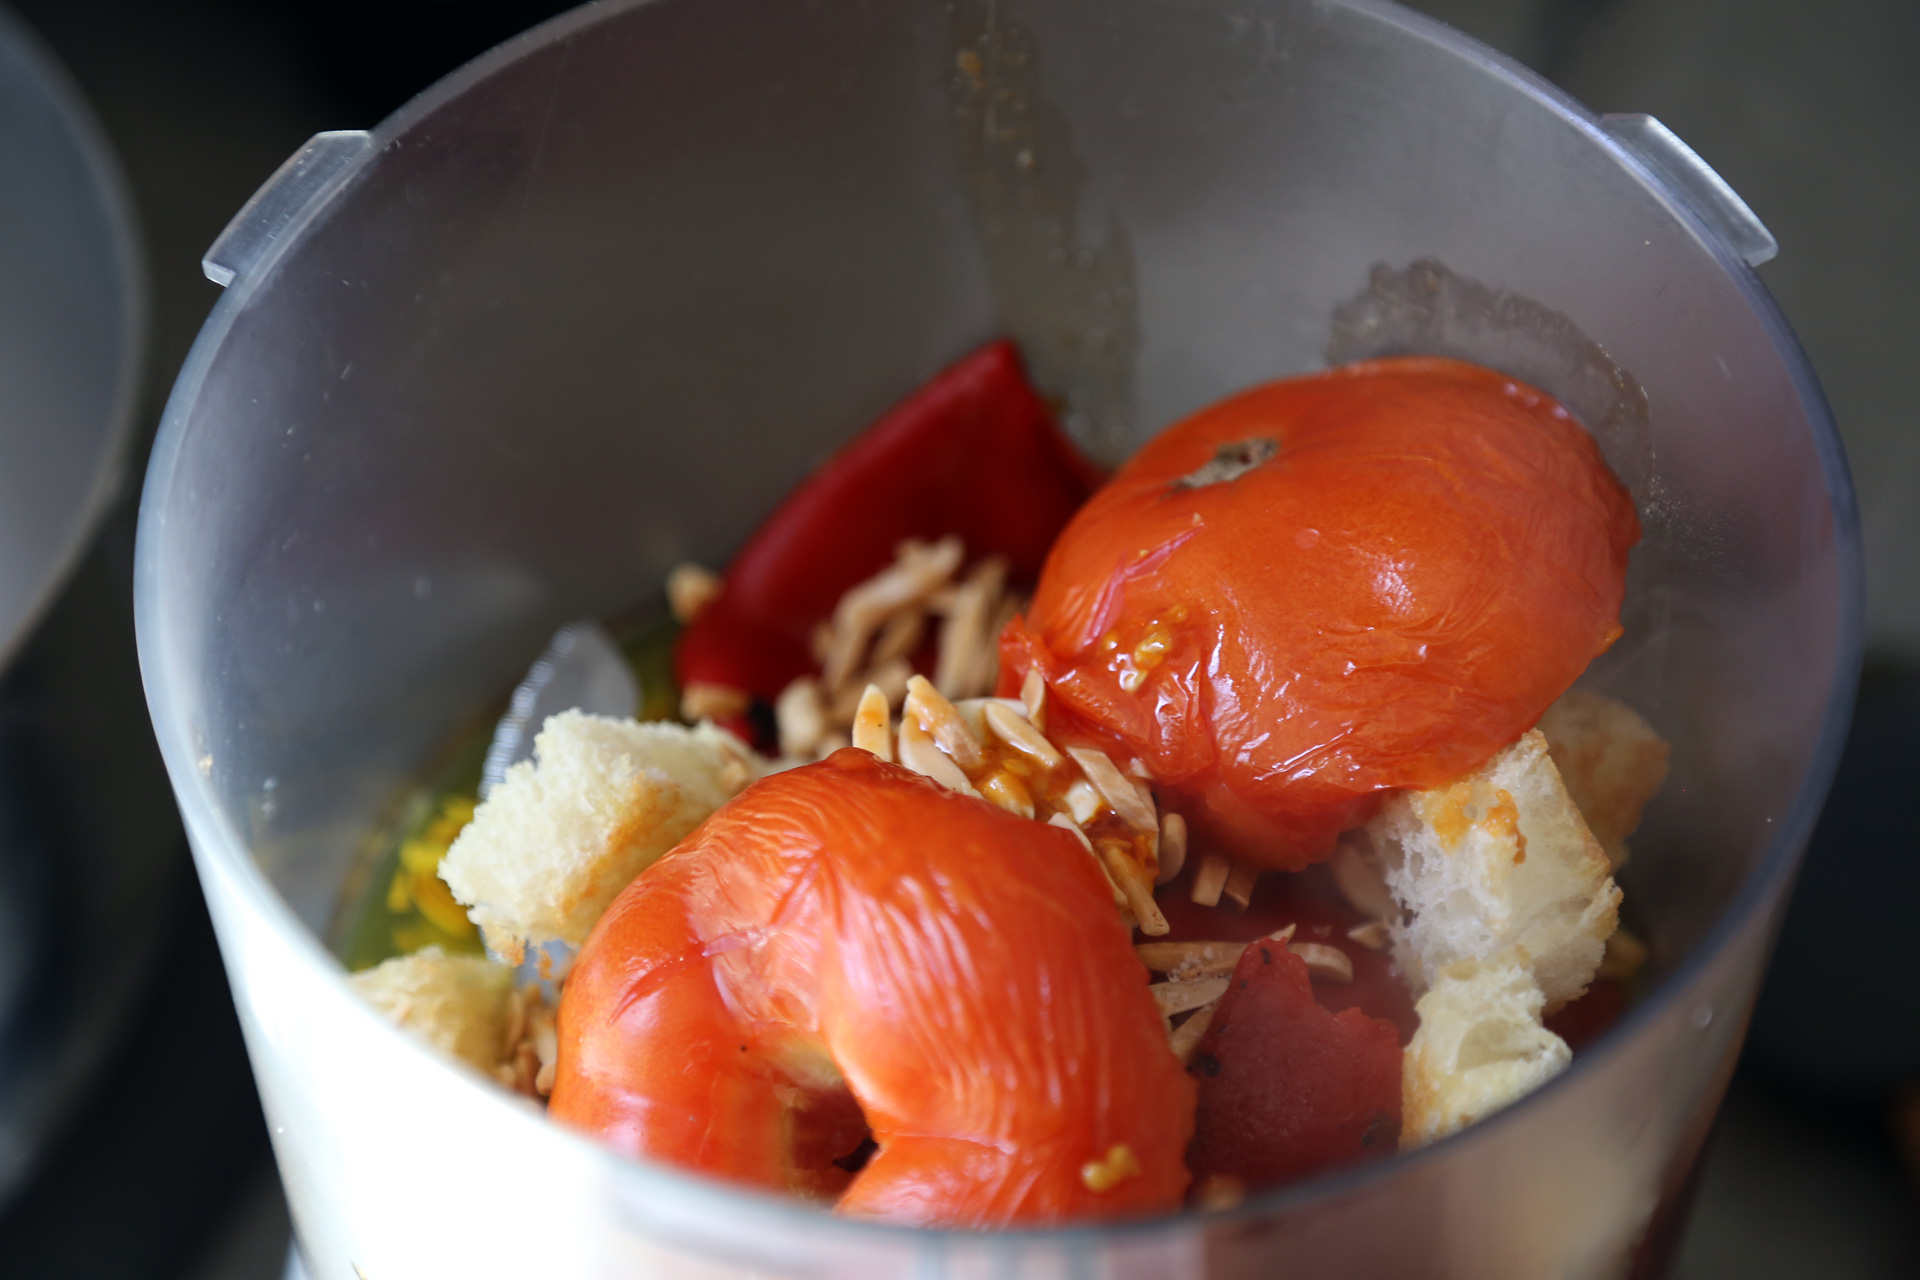 Continue to roast the tomato and garlic for another 10 minutes. Remove the tomato peel and discard. Transfer the tomato and garlic to the food processor.